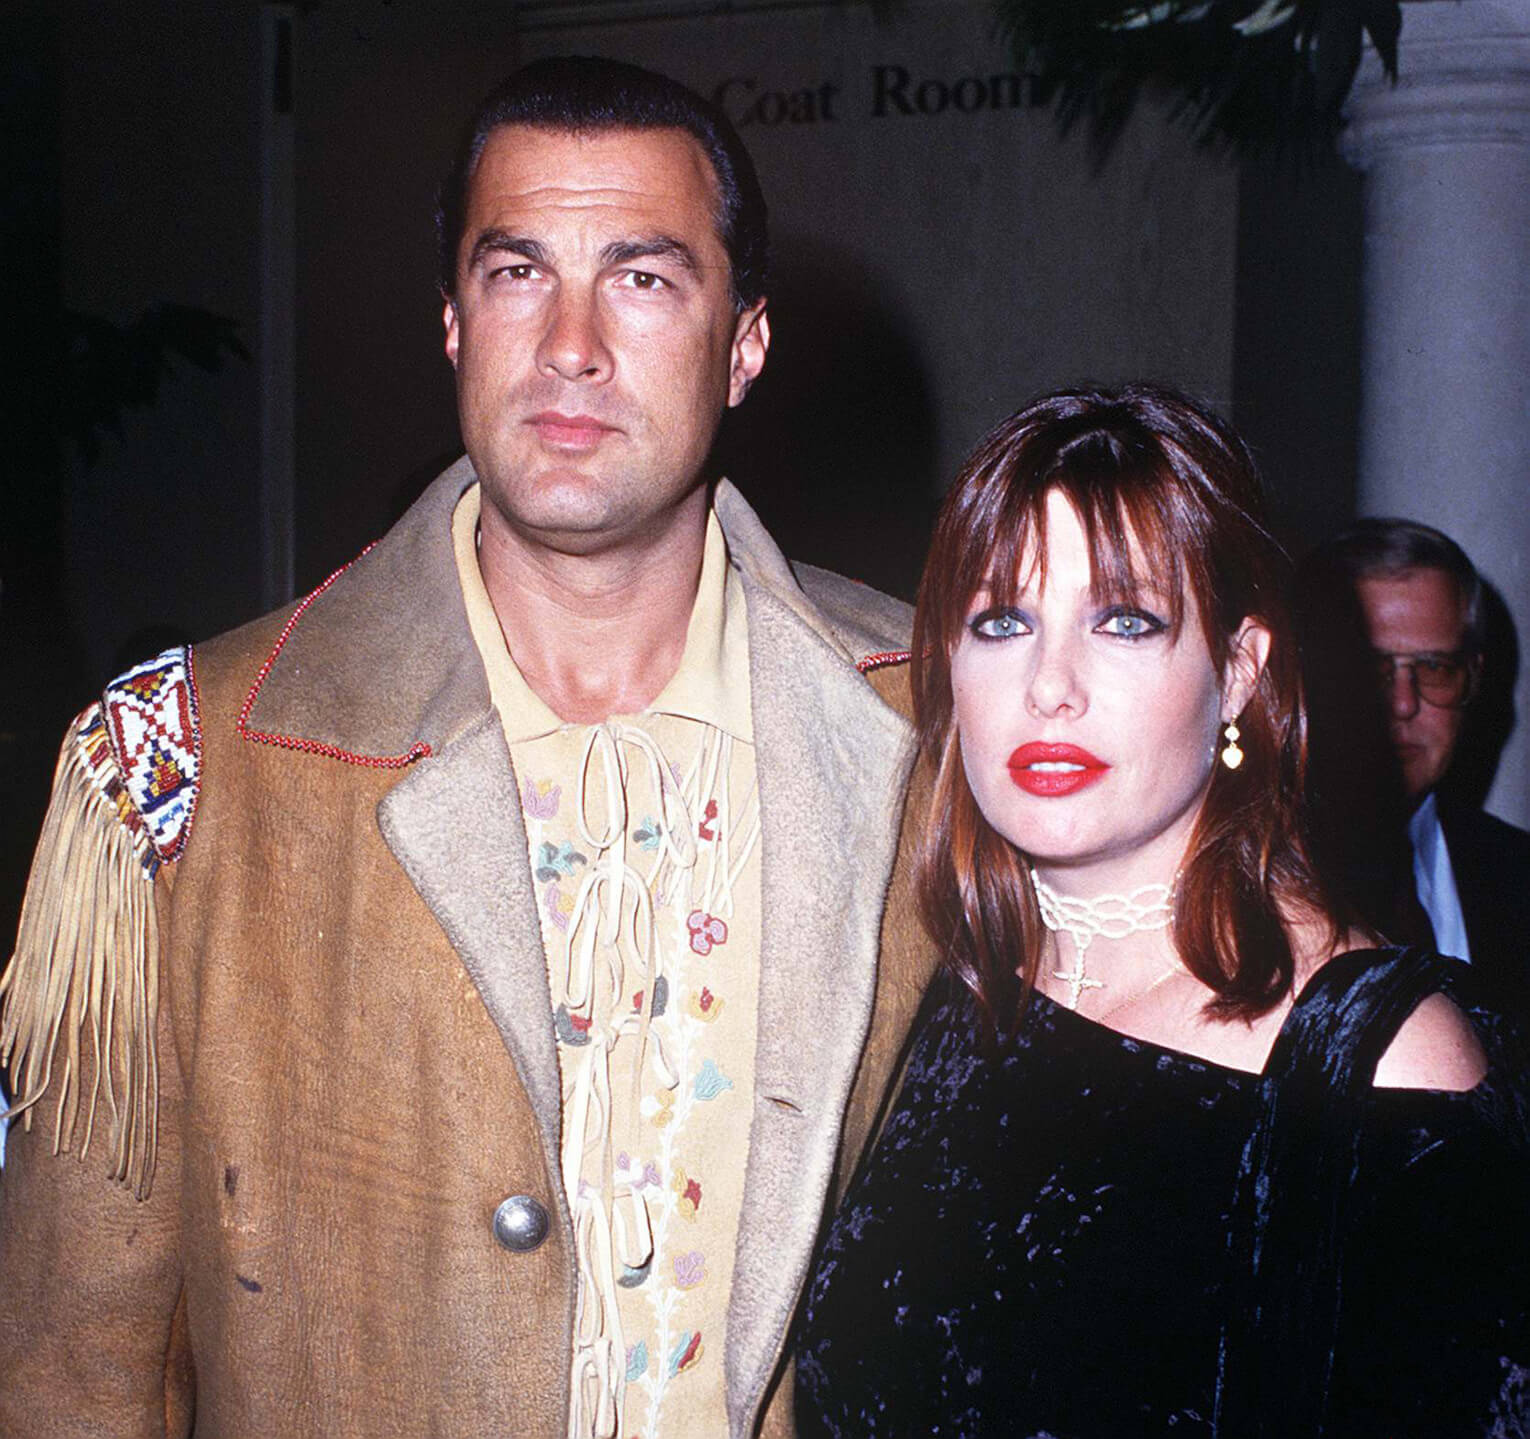 Steven Seagal in 1992 with his wife, Kelly LeBrock